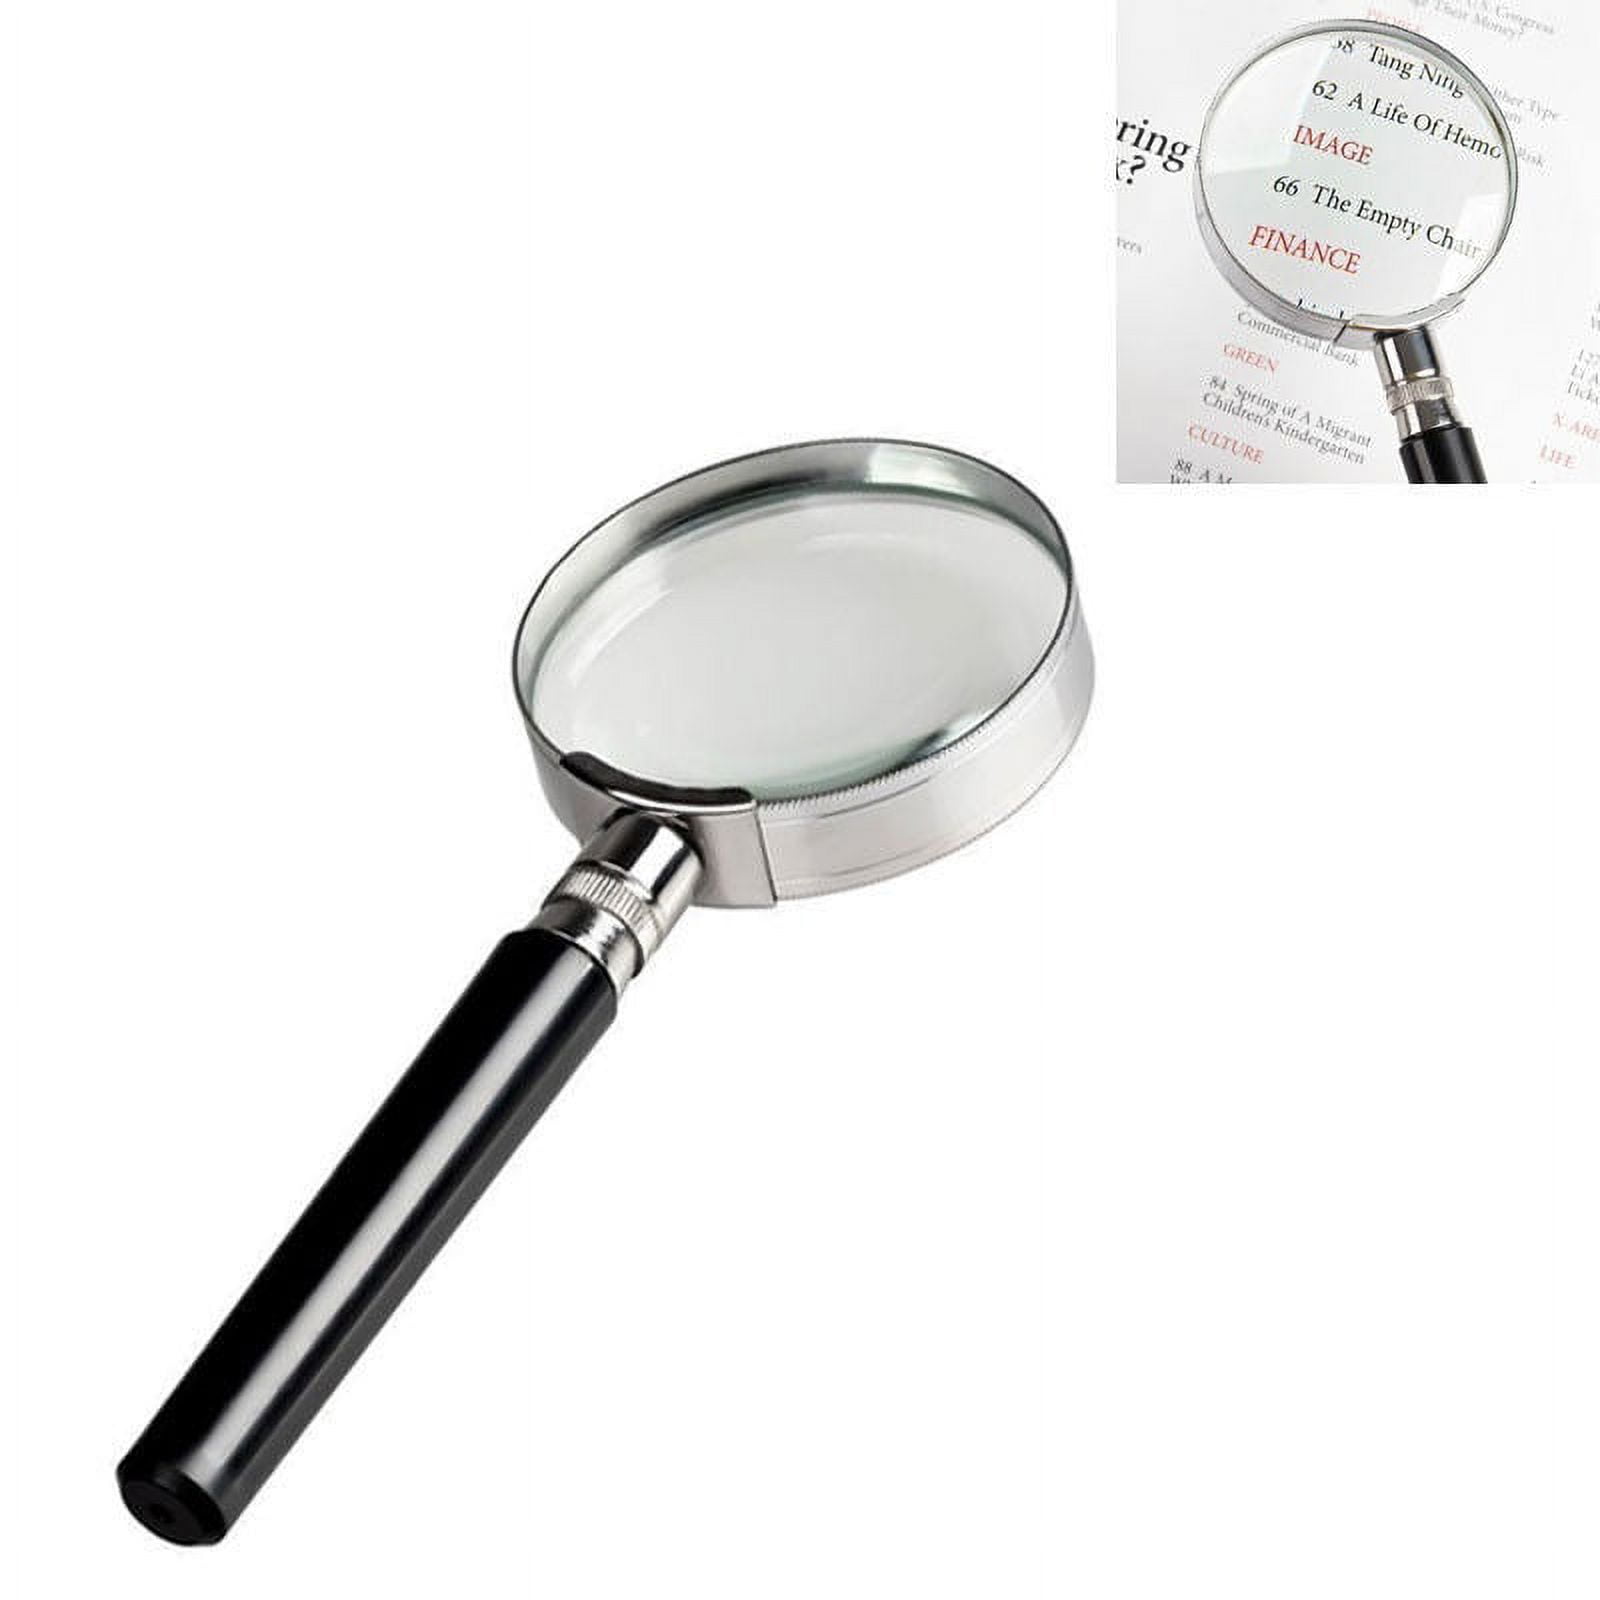 Othmro Magnifying Glass Magnifier 10x Handheld Magnifying Tool with Plastic Handle Lens Diameter 50mm